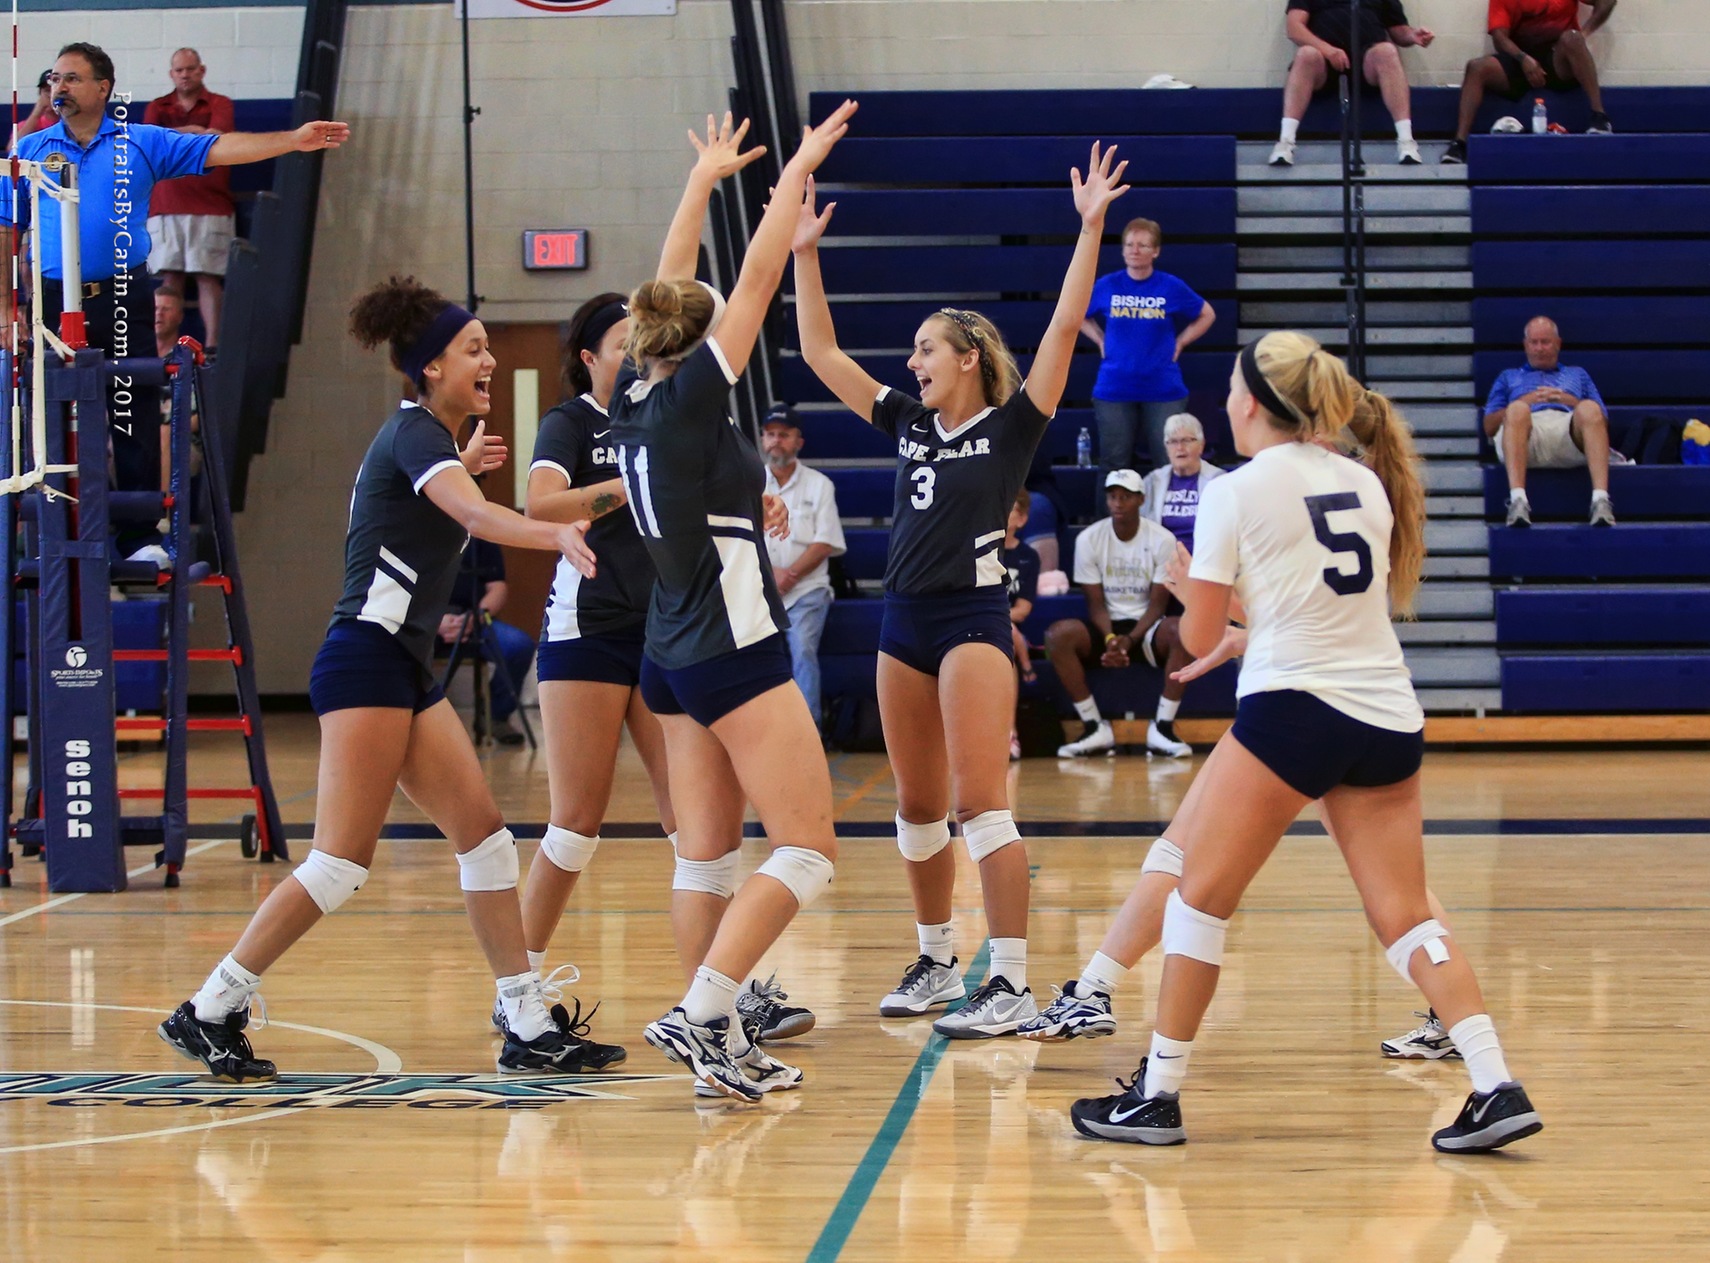 Volleyball Wins Second Match of Weekend